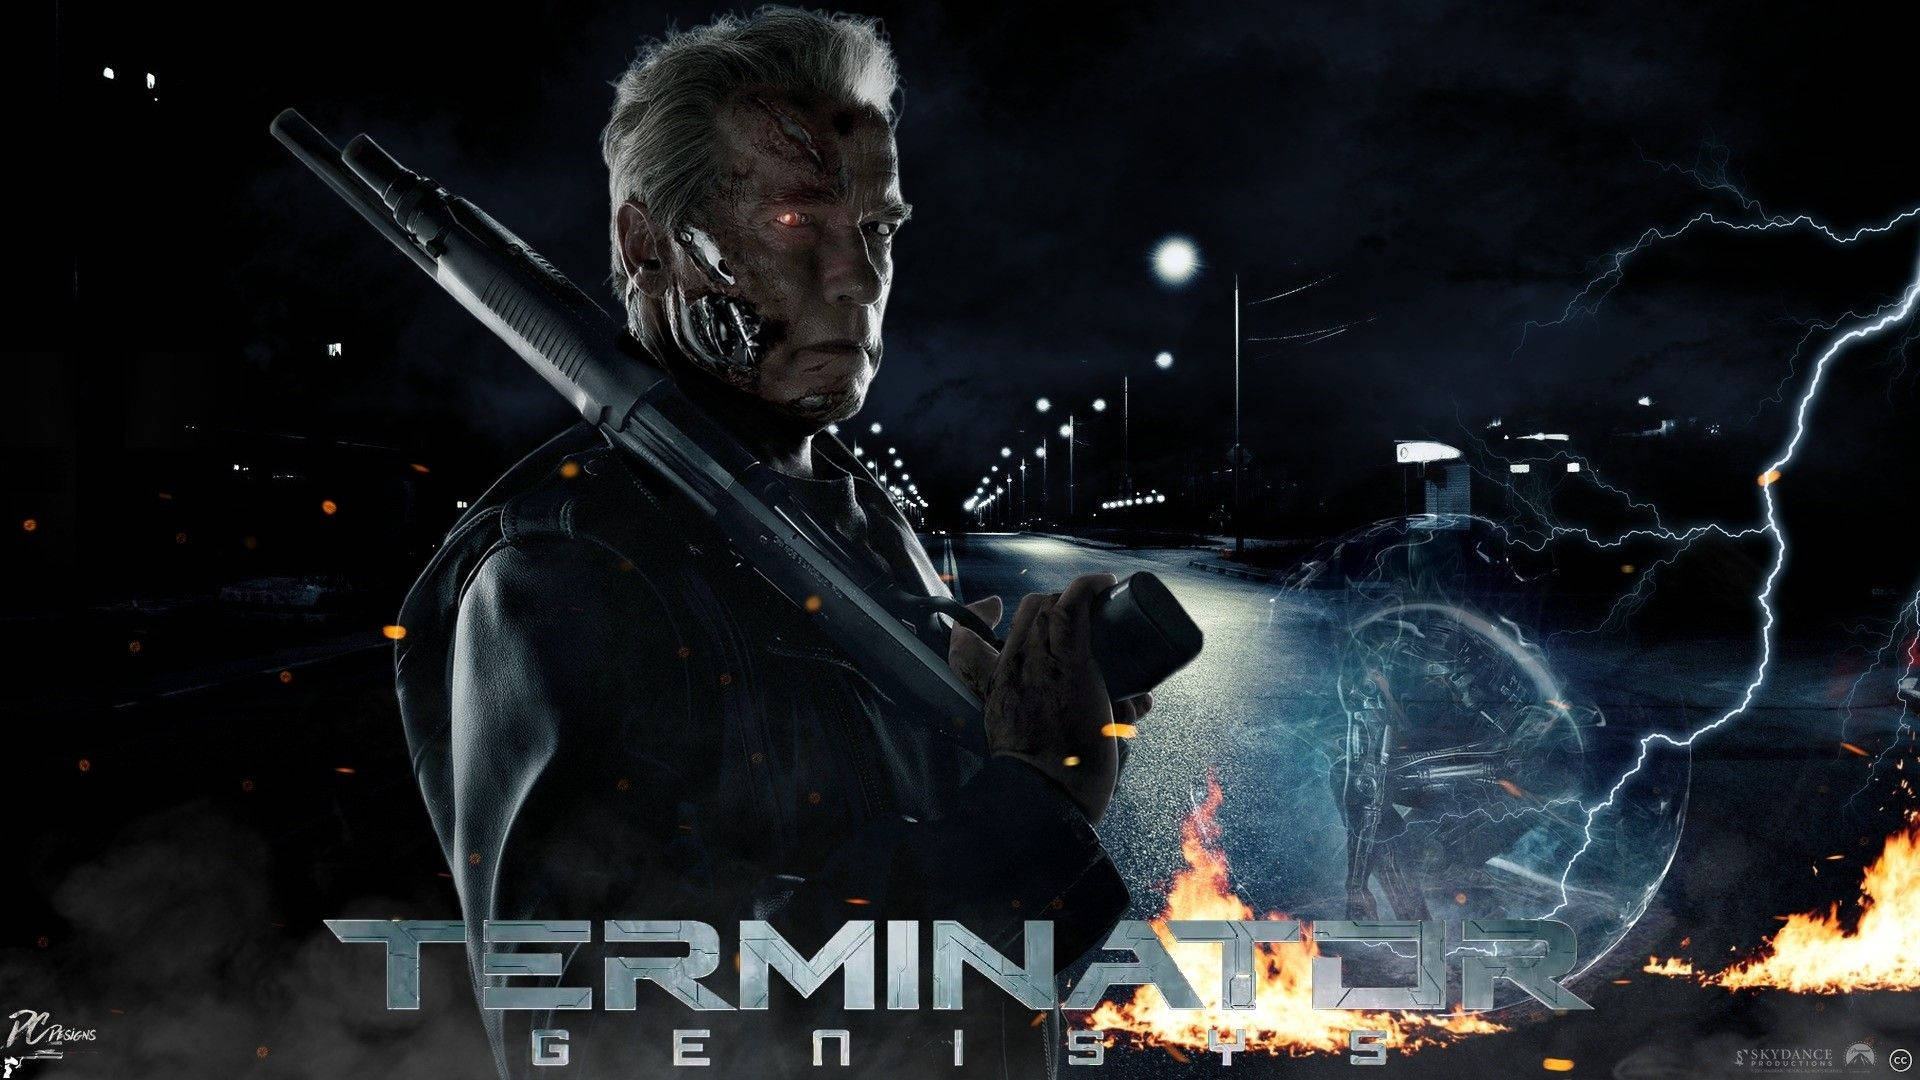 Terminator Genisys Poster Background